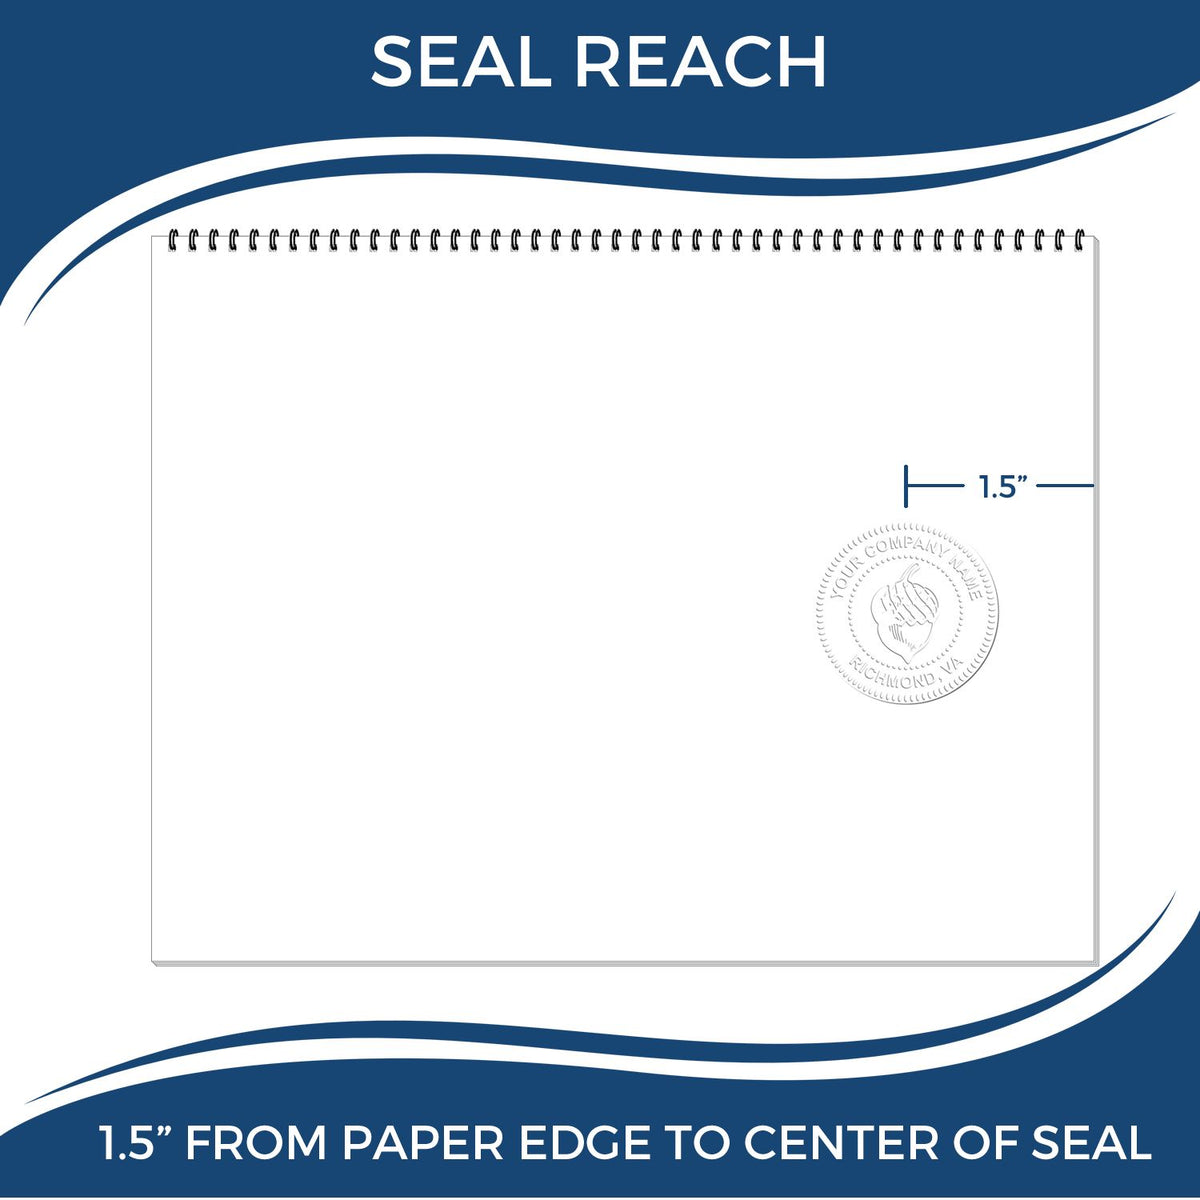 An infographic showing the seal reach which is represented by a ruler and a miniature seal image of the Gift Oklahoma Engineer Seal